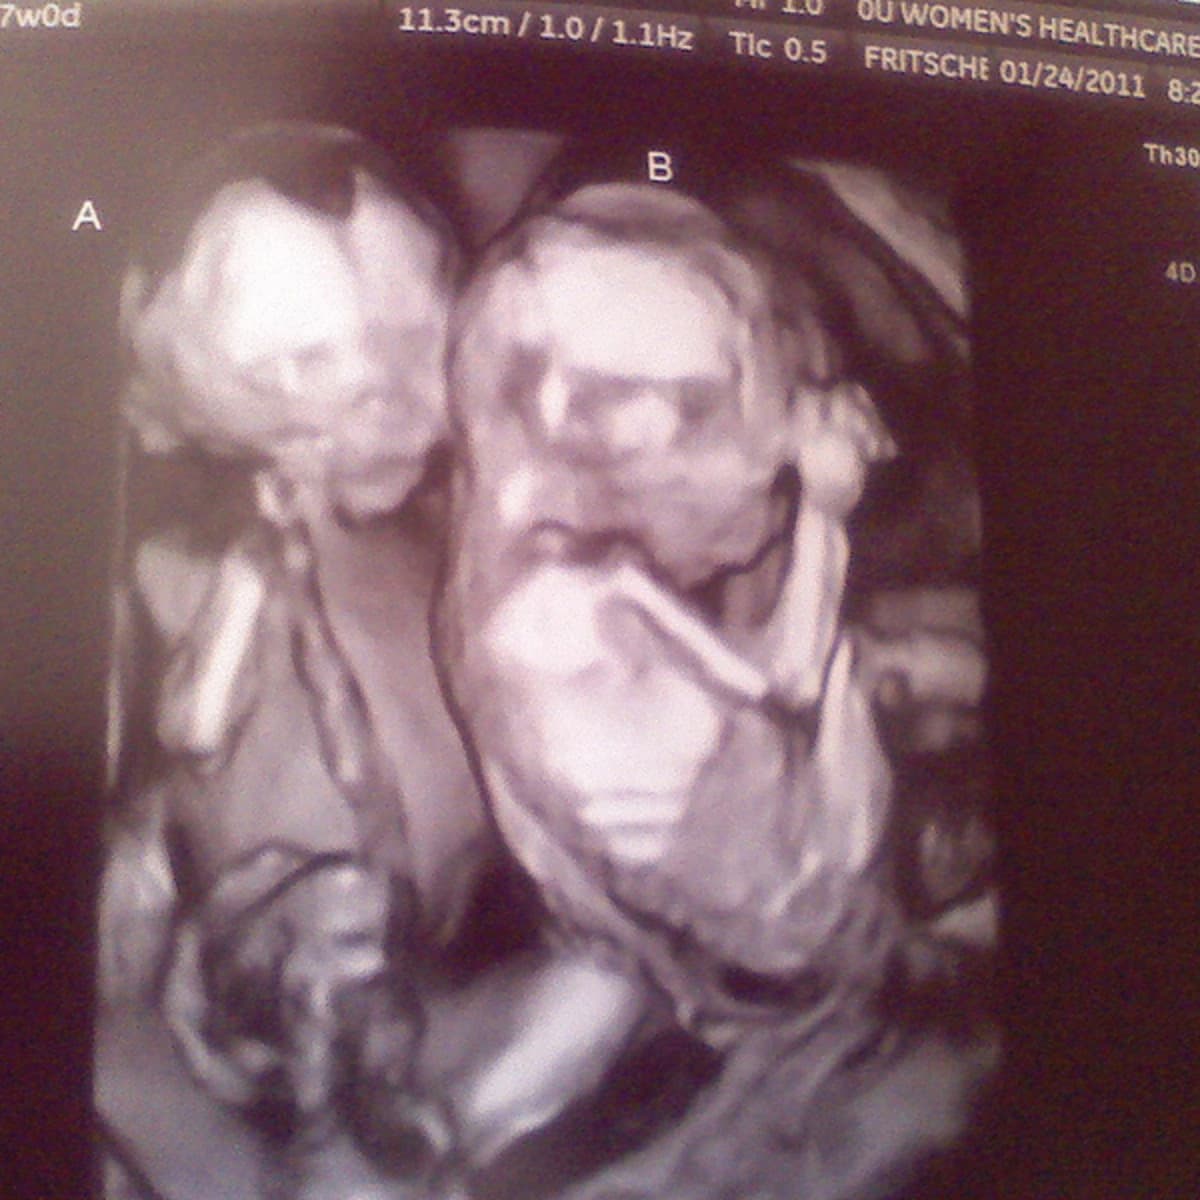 Pictures ultrasound missed twin 20 Weeks